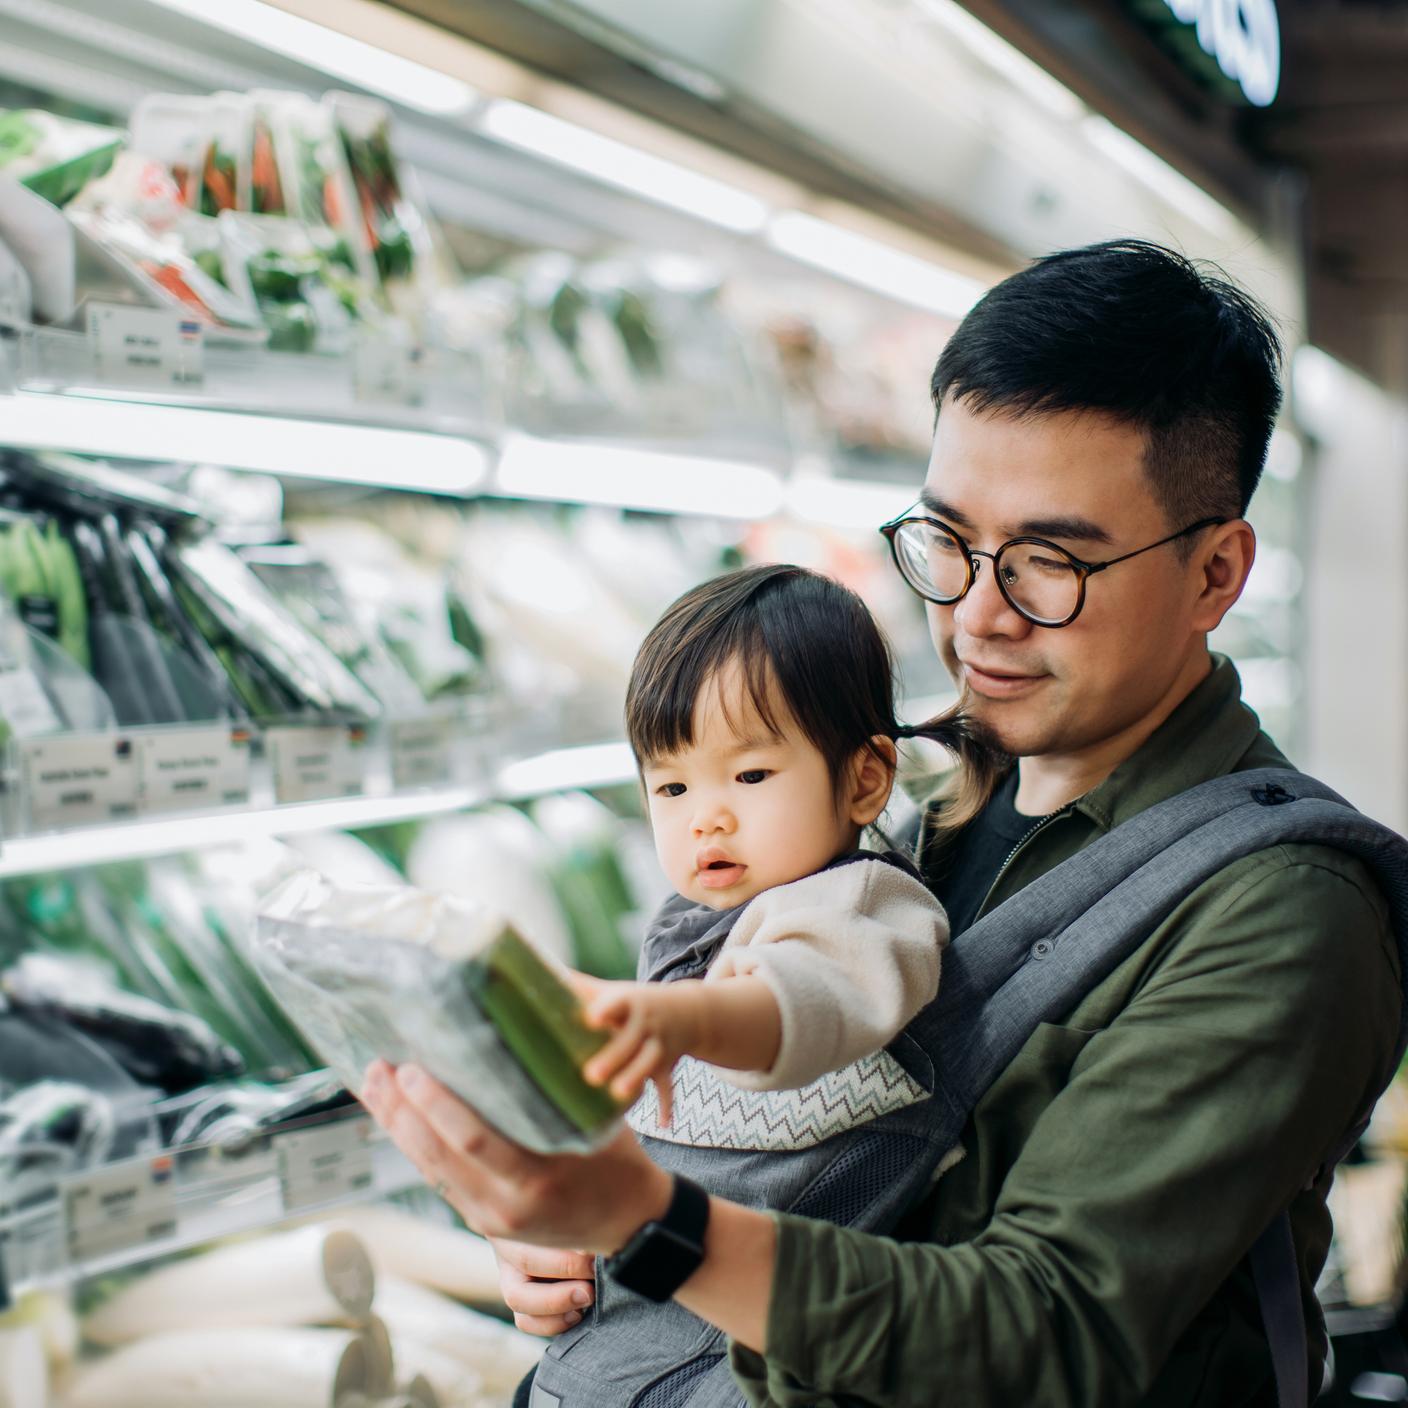 A clear view of your supply chain - father and toddler shopping